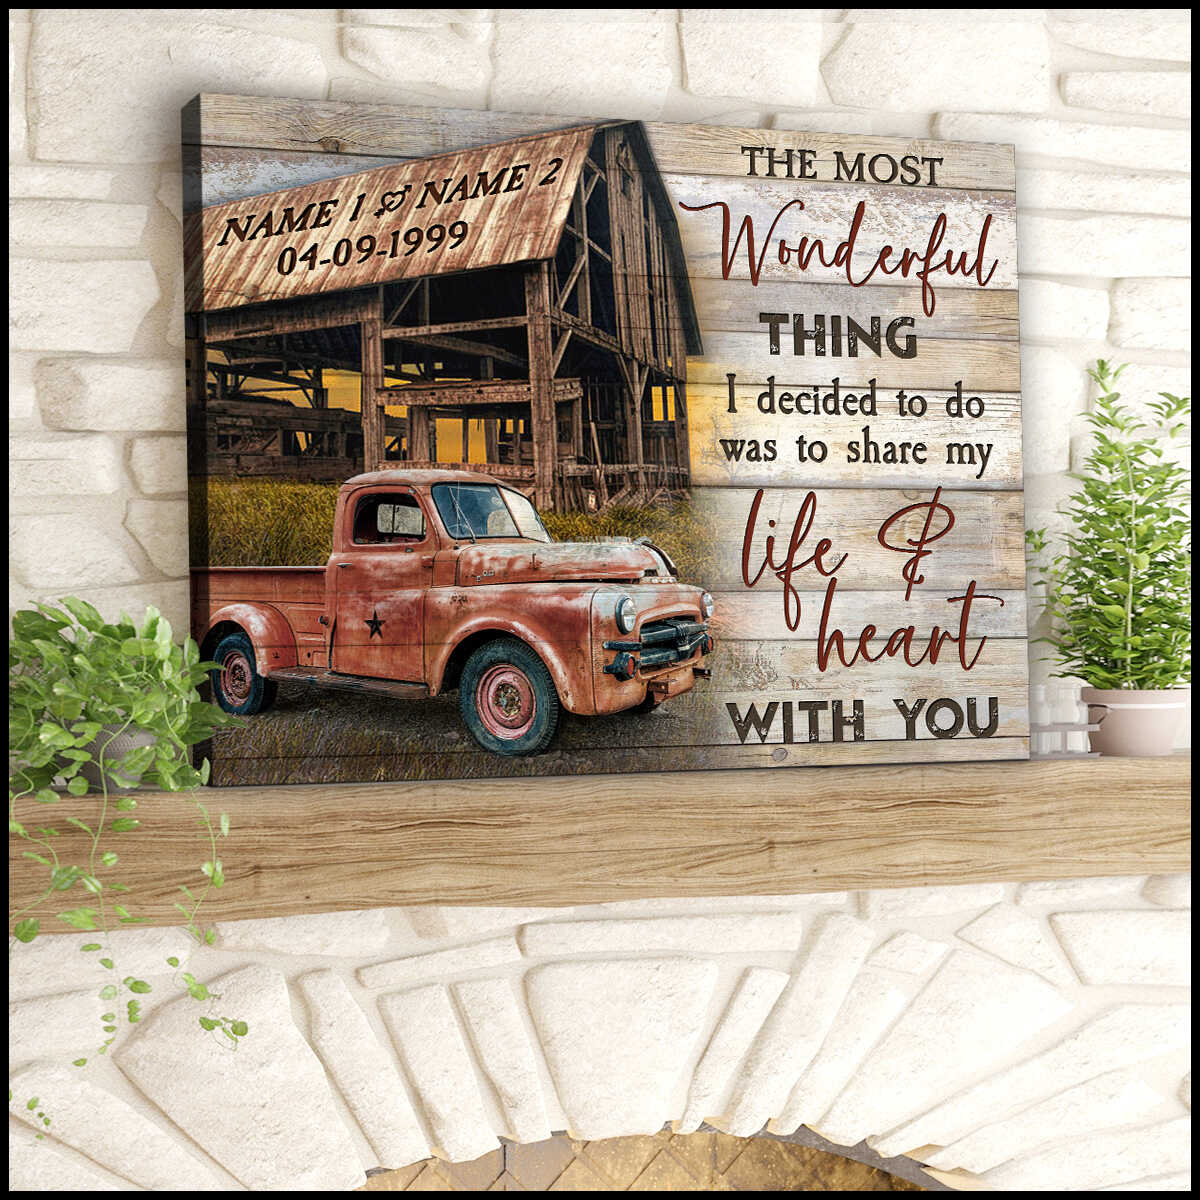 Personalized Custom Name And Date Old Barn And Rustic Pickup Truck Canvas Prints Wall Art Decor The Most Wonderful Thing I Decided To Do Was To Share My Life And Heart With You